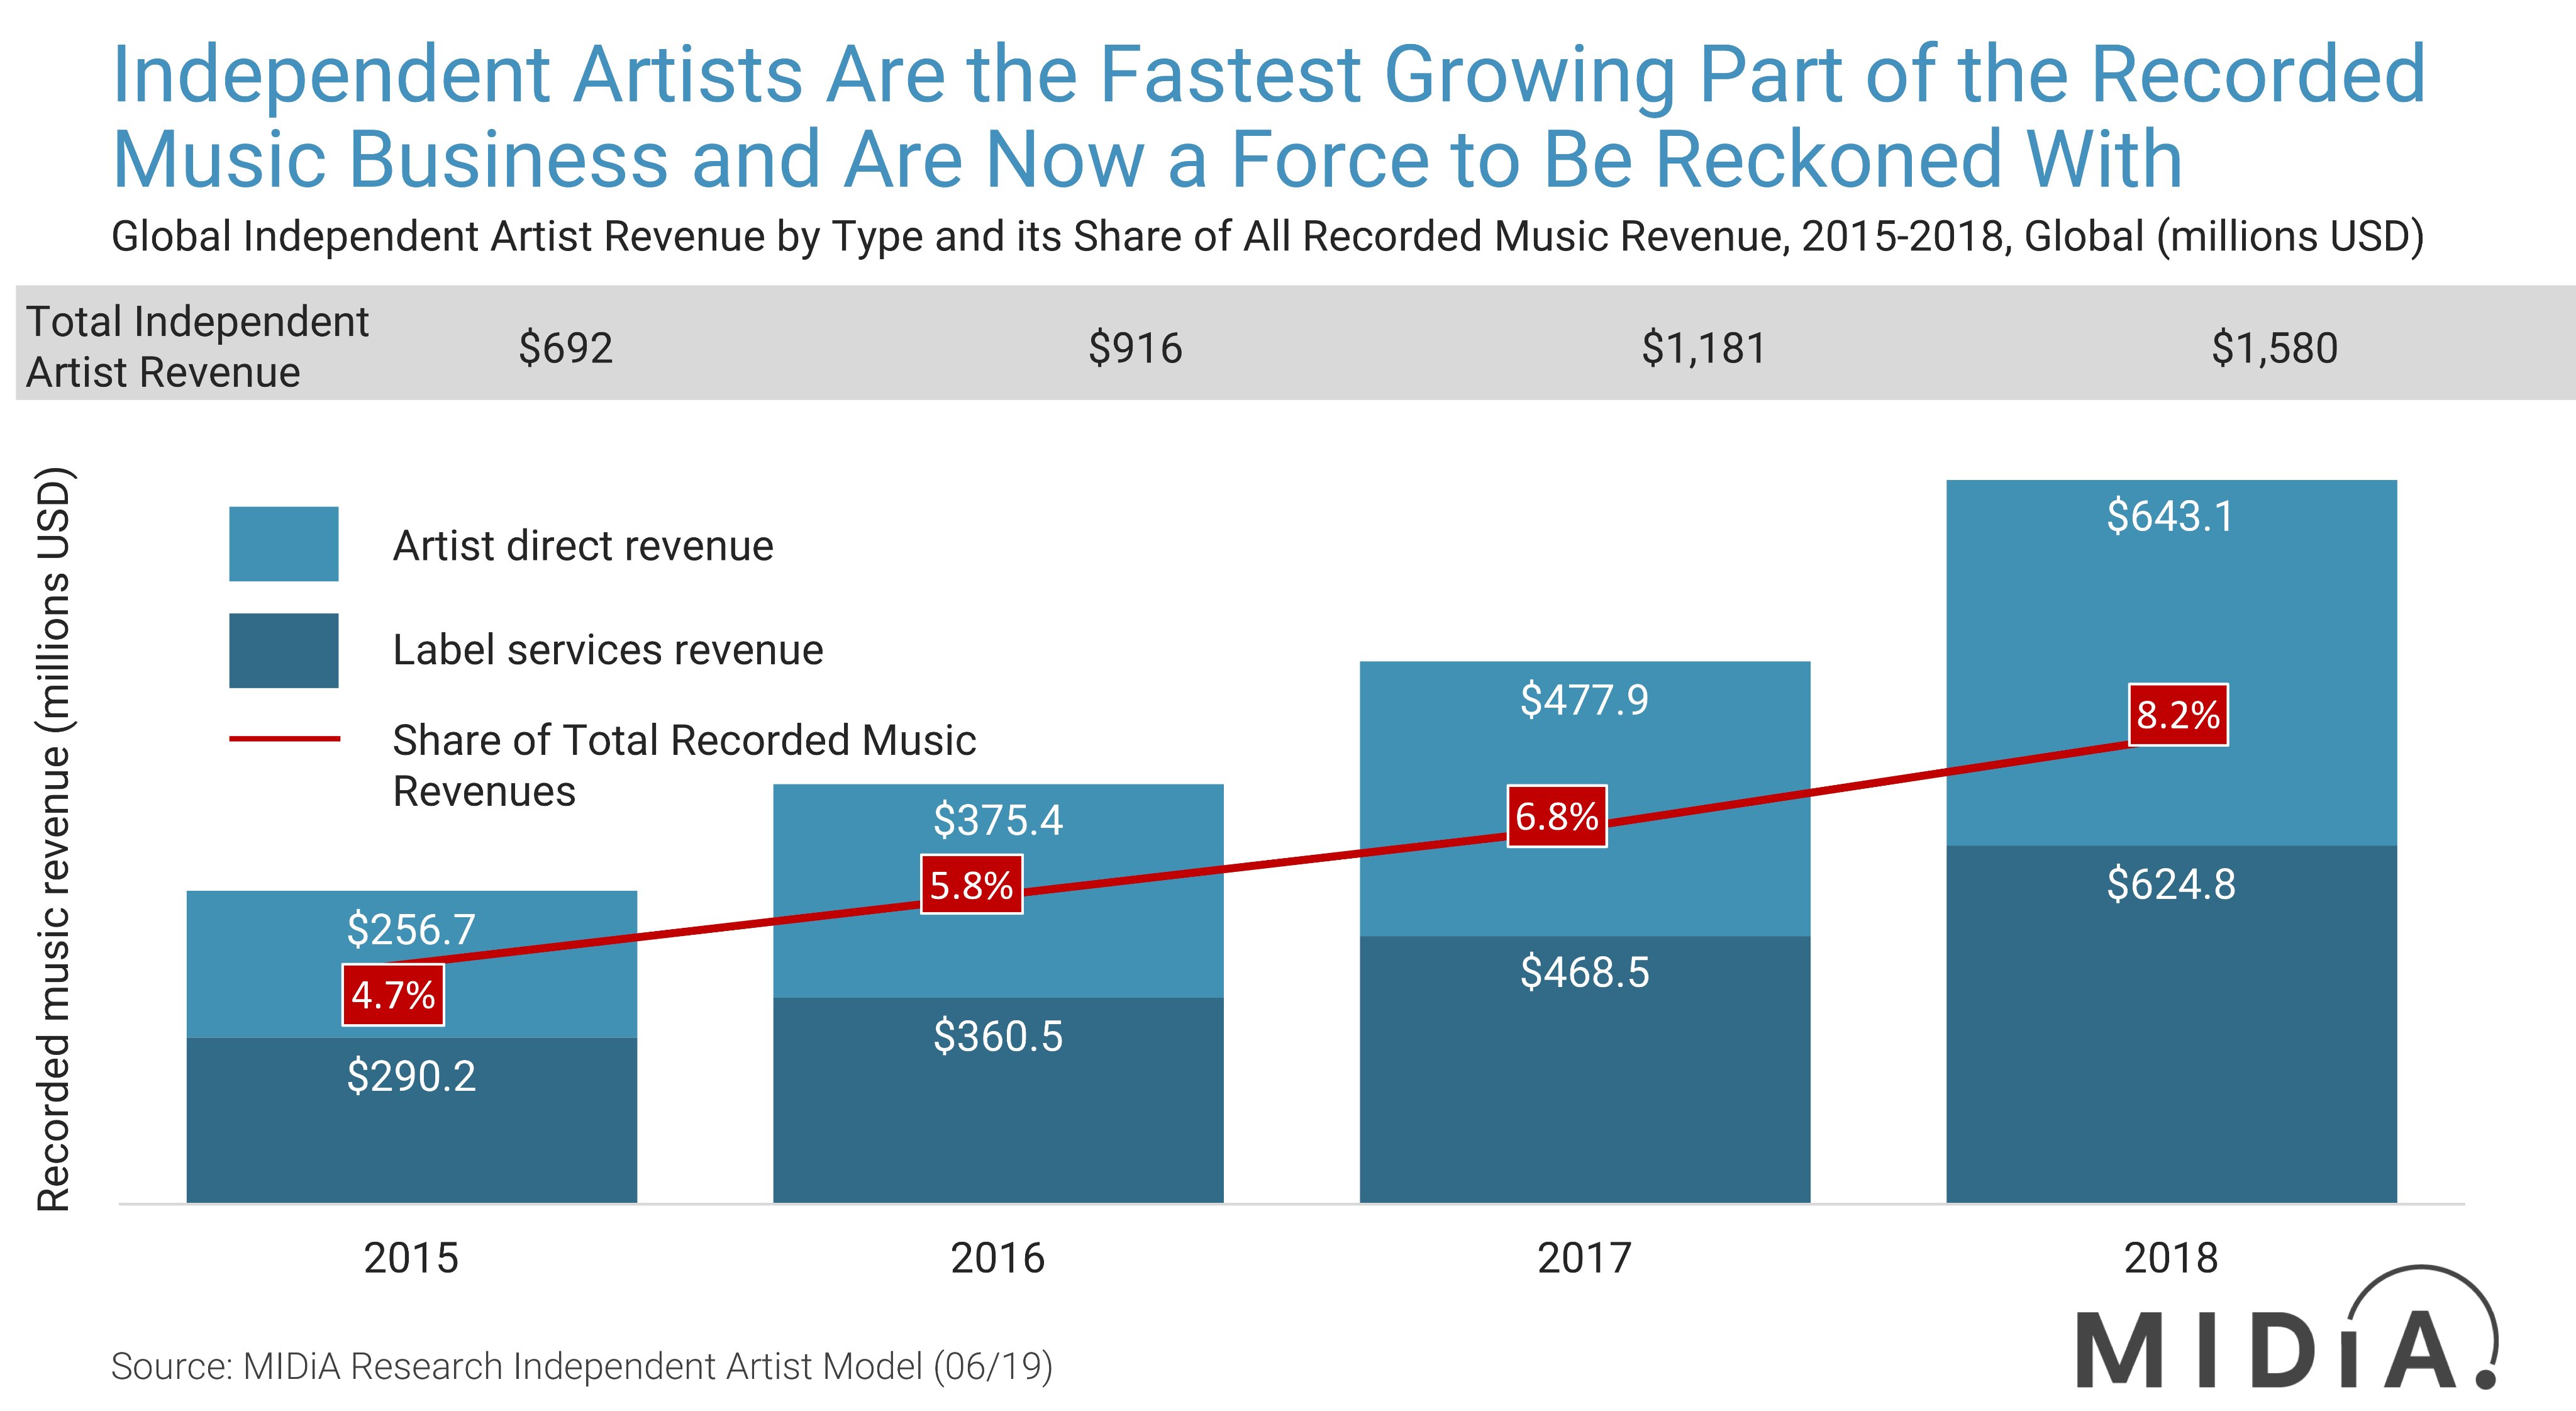 Independent music is the fastest growing part of the industry